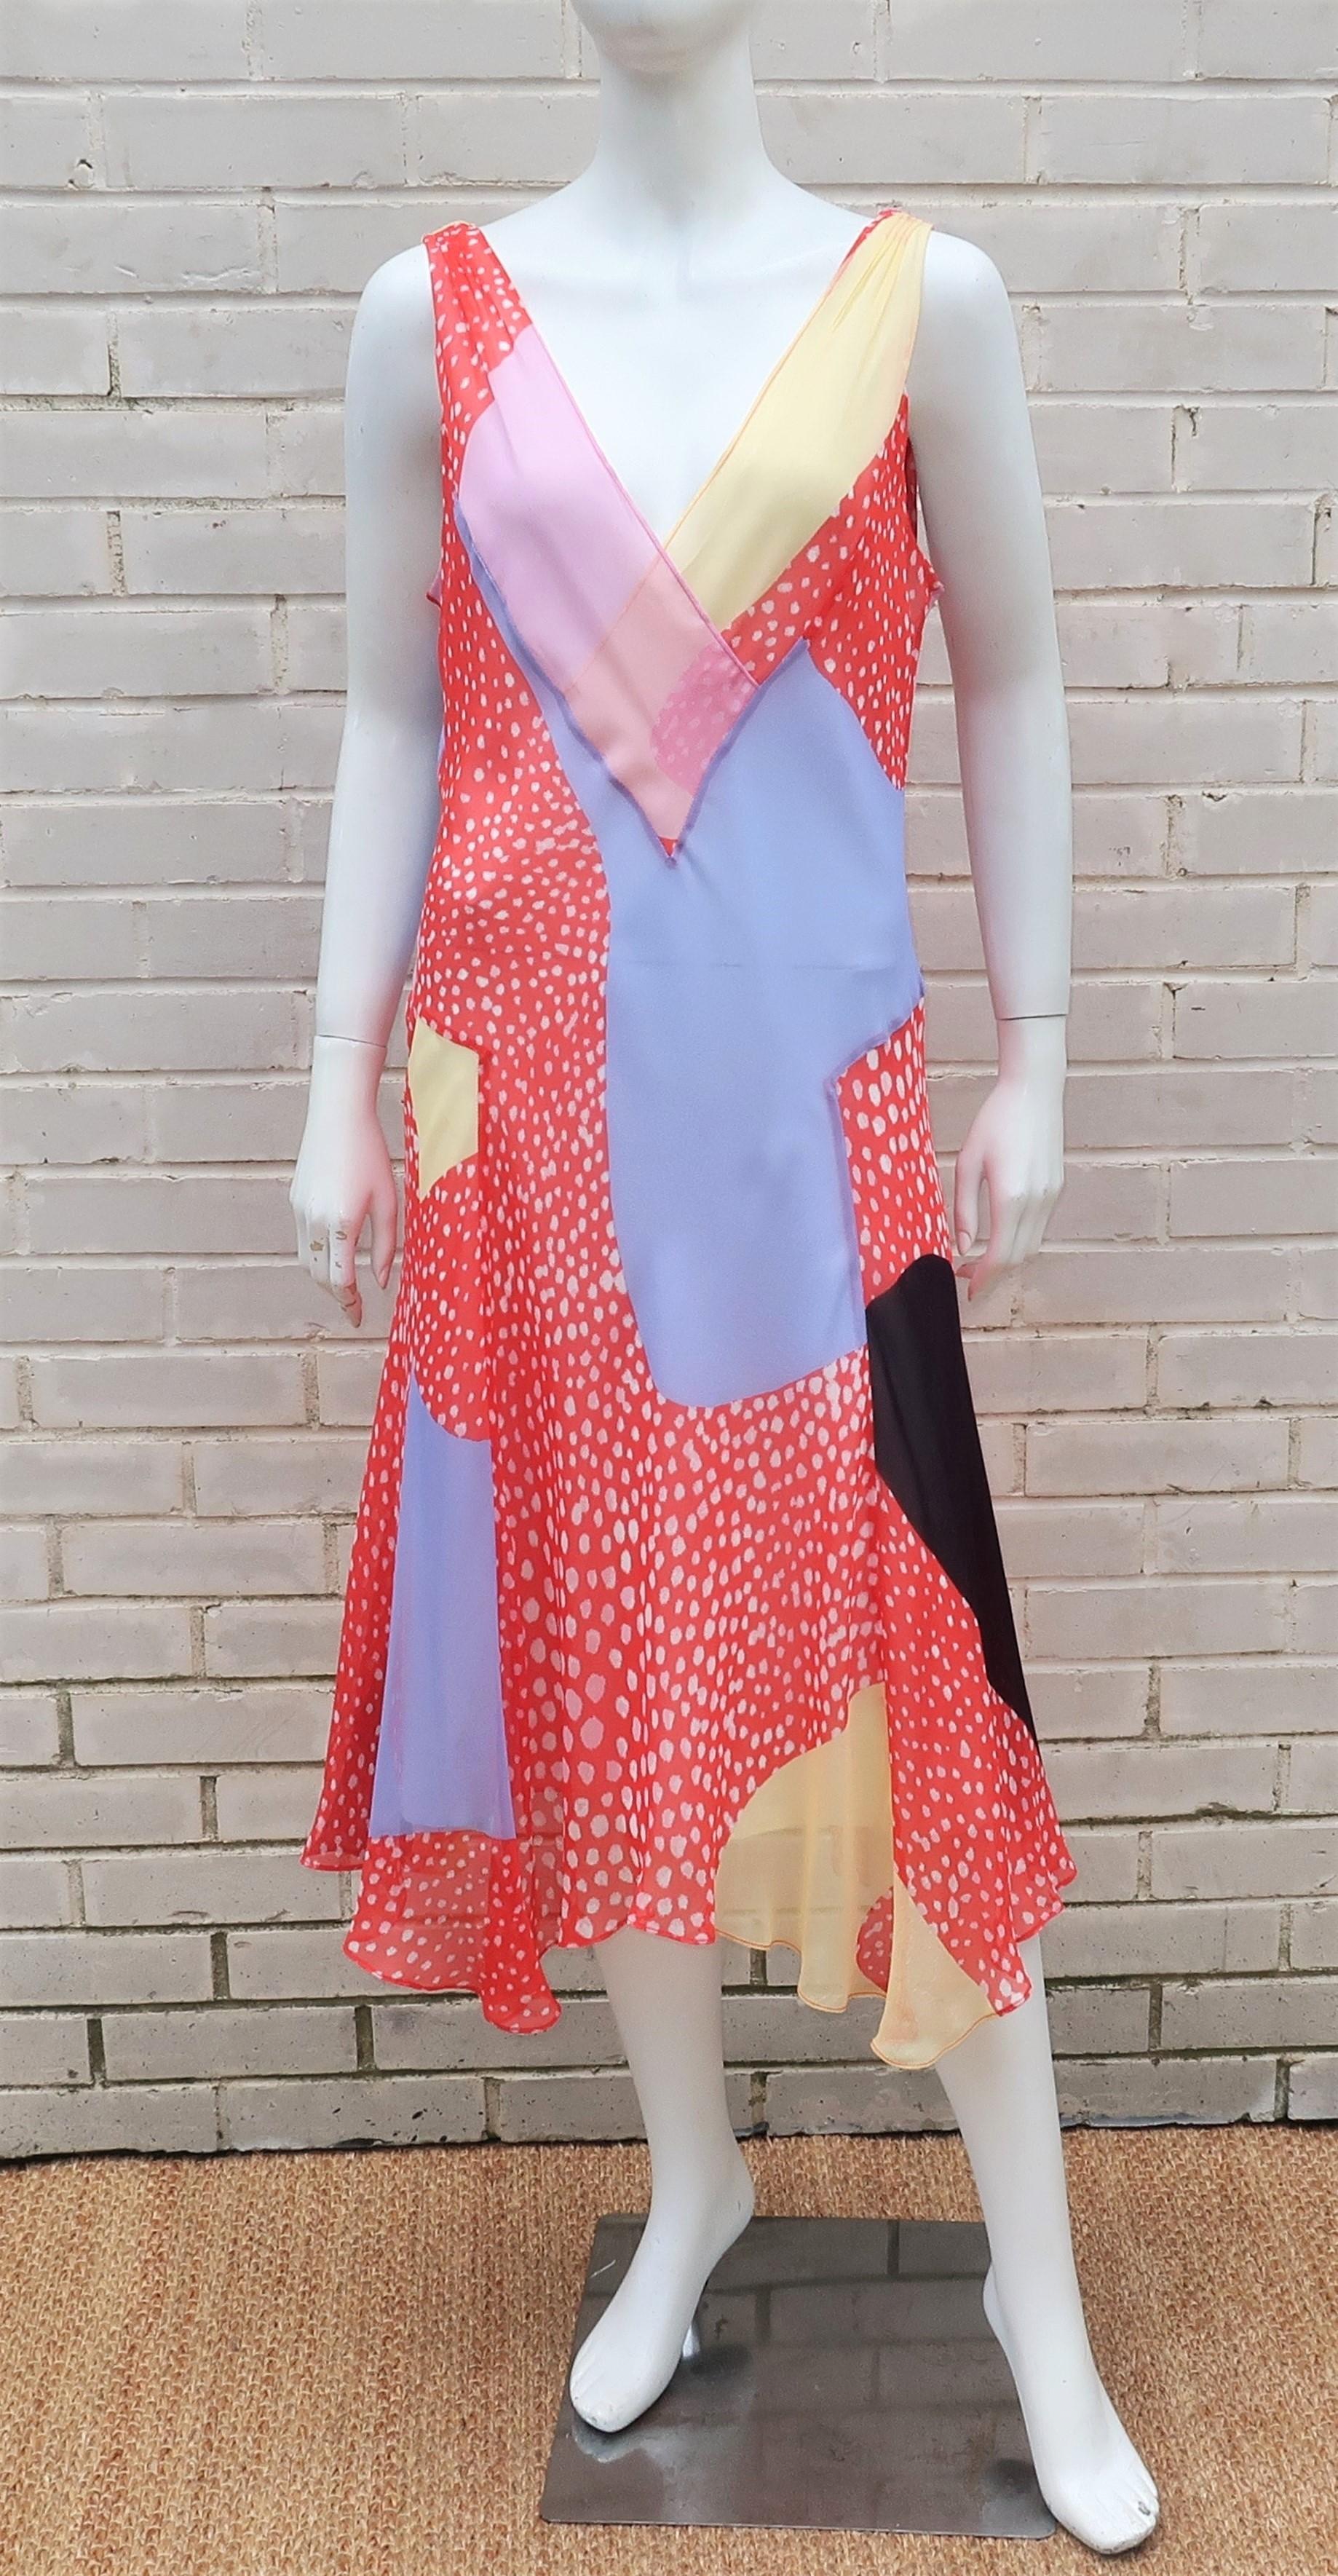 Diane Von Furstenberg’s stylish take on a handkerchief dress in a colorful patchwork of silk chiffon fabrics displaying red and white abstract polka dots accented with shades of pink, yellow, periwinkle blue and black.  The pullover construction